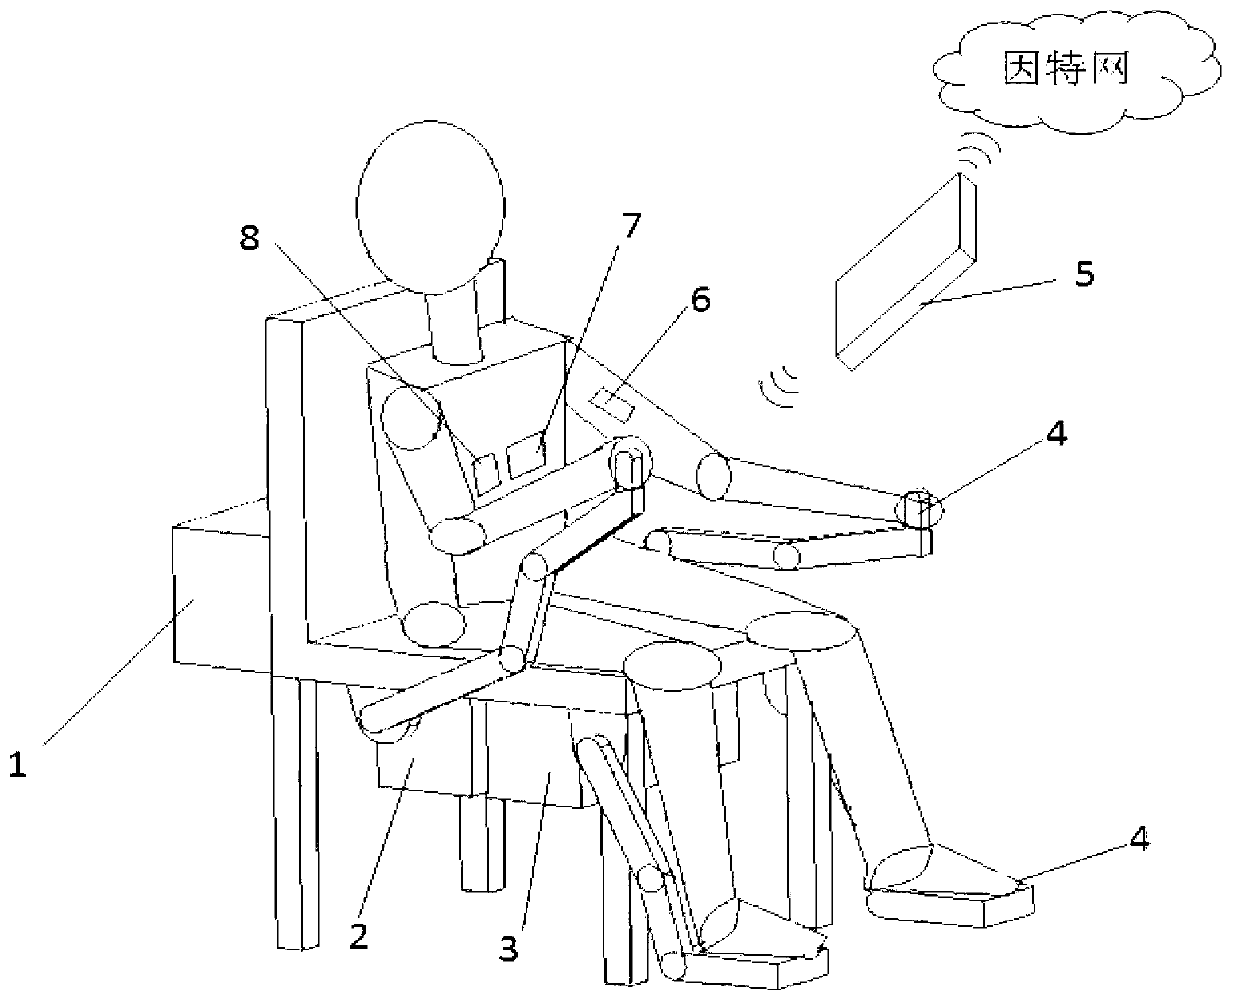 Control system for intelligent health chair